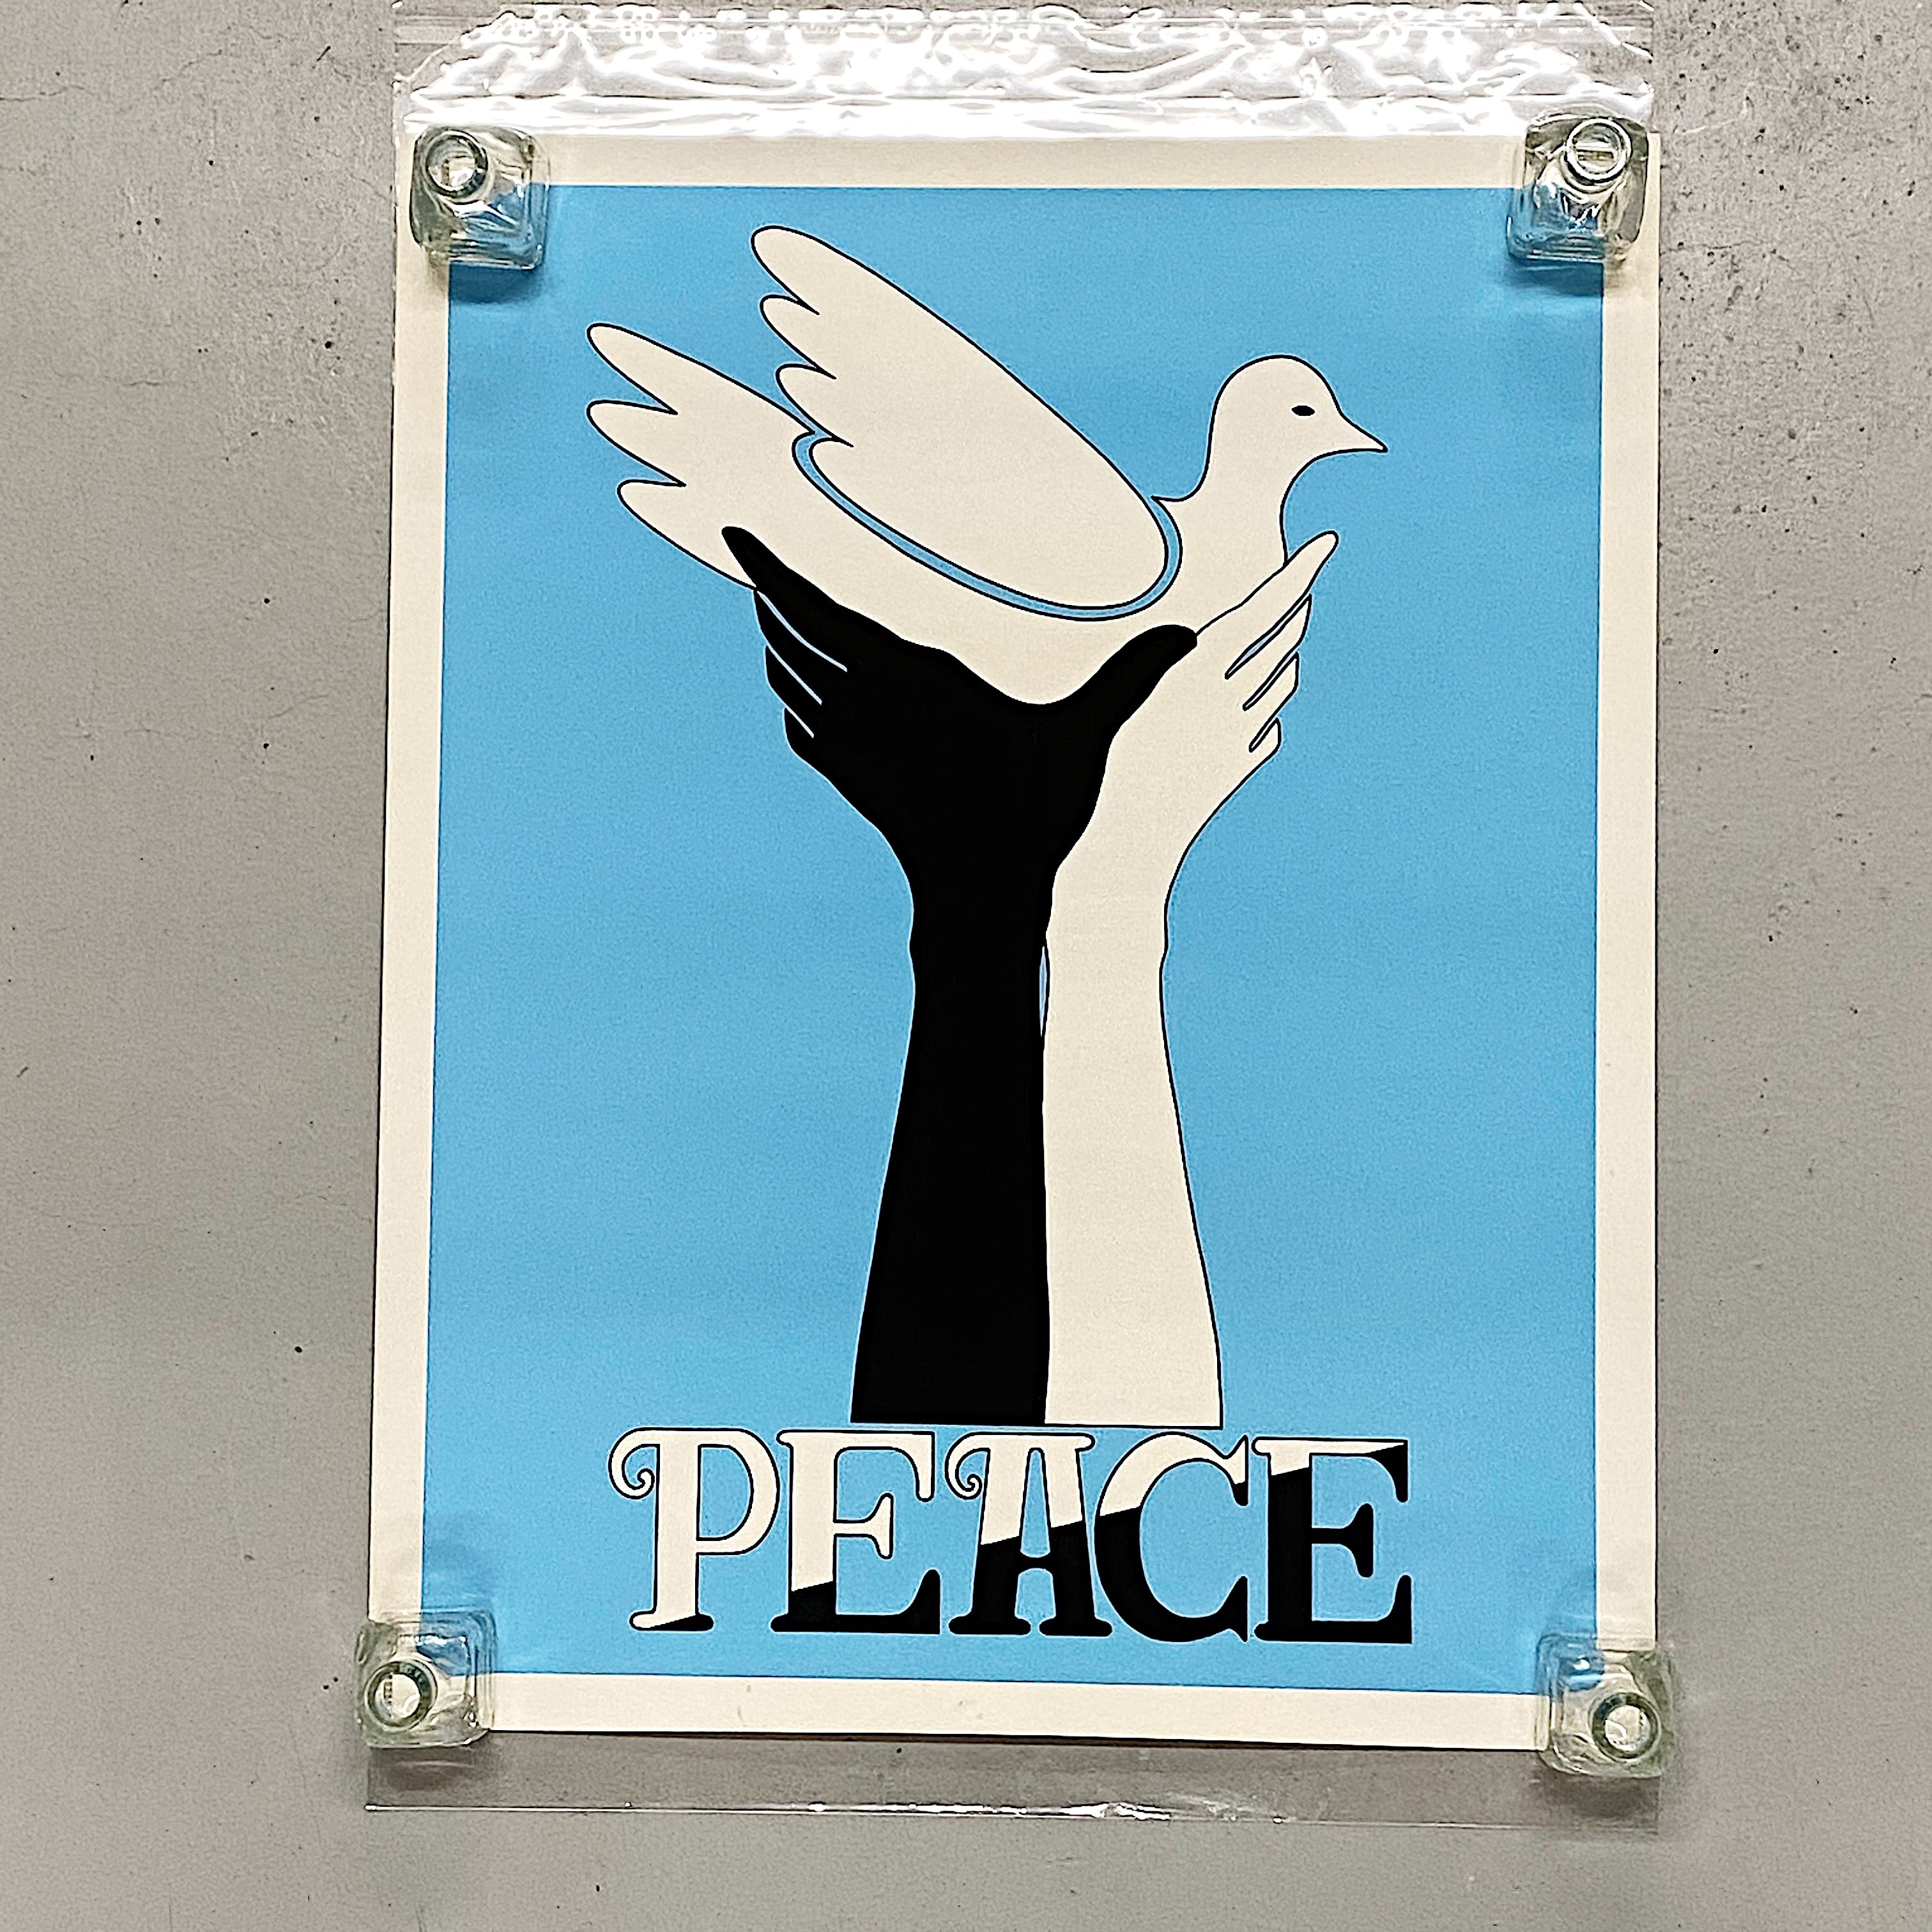 1960s Peace Poster with Dove and Hands - Rare Civil Rights Artwork - Blacklight? - Hippie Wall Art - Haight Ashbury - Counter Culture Cool